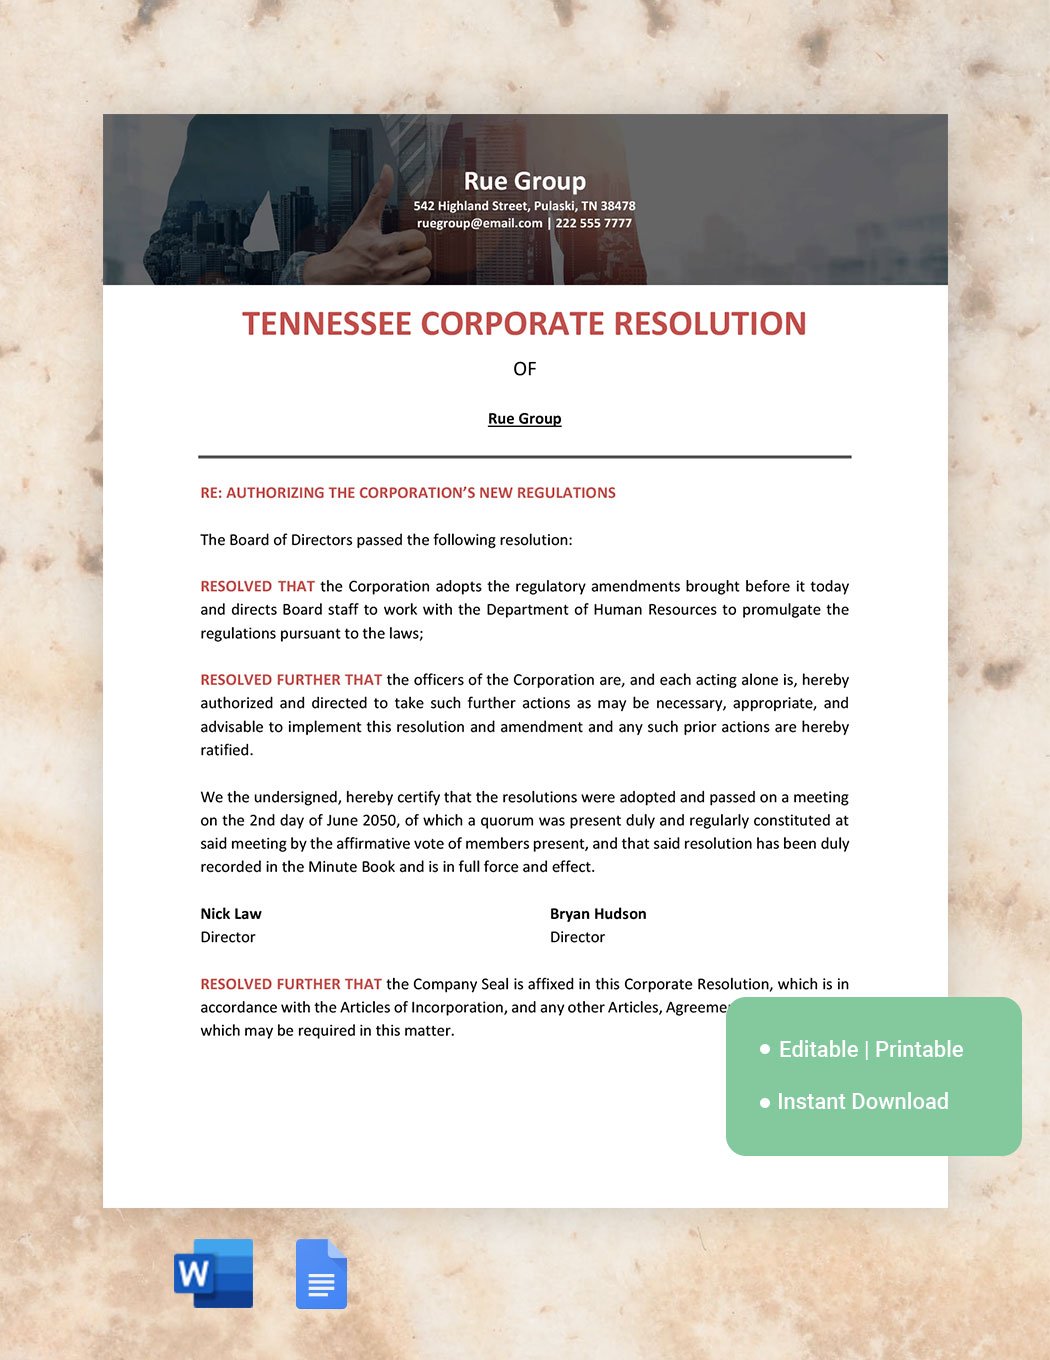 Tennessee Corporate Resolution Template in Word, Google Docs